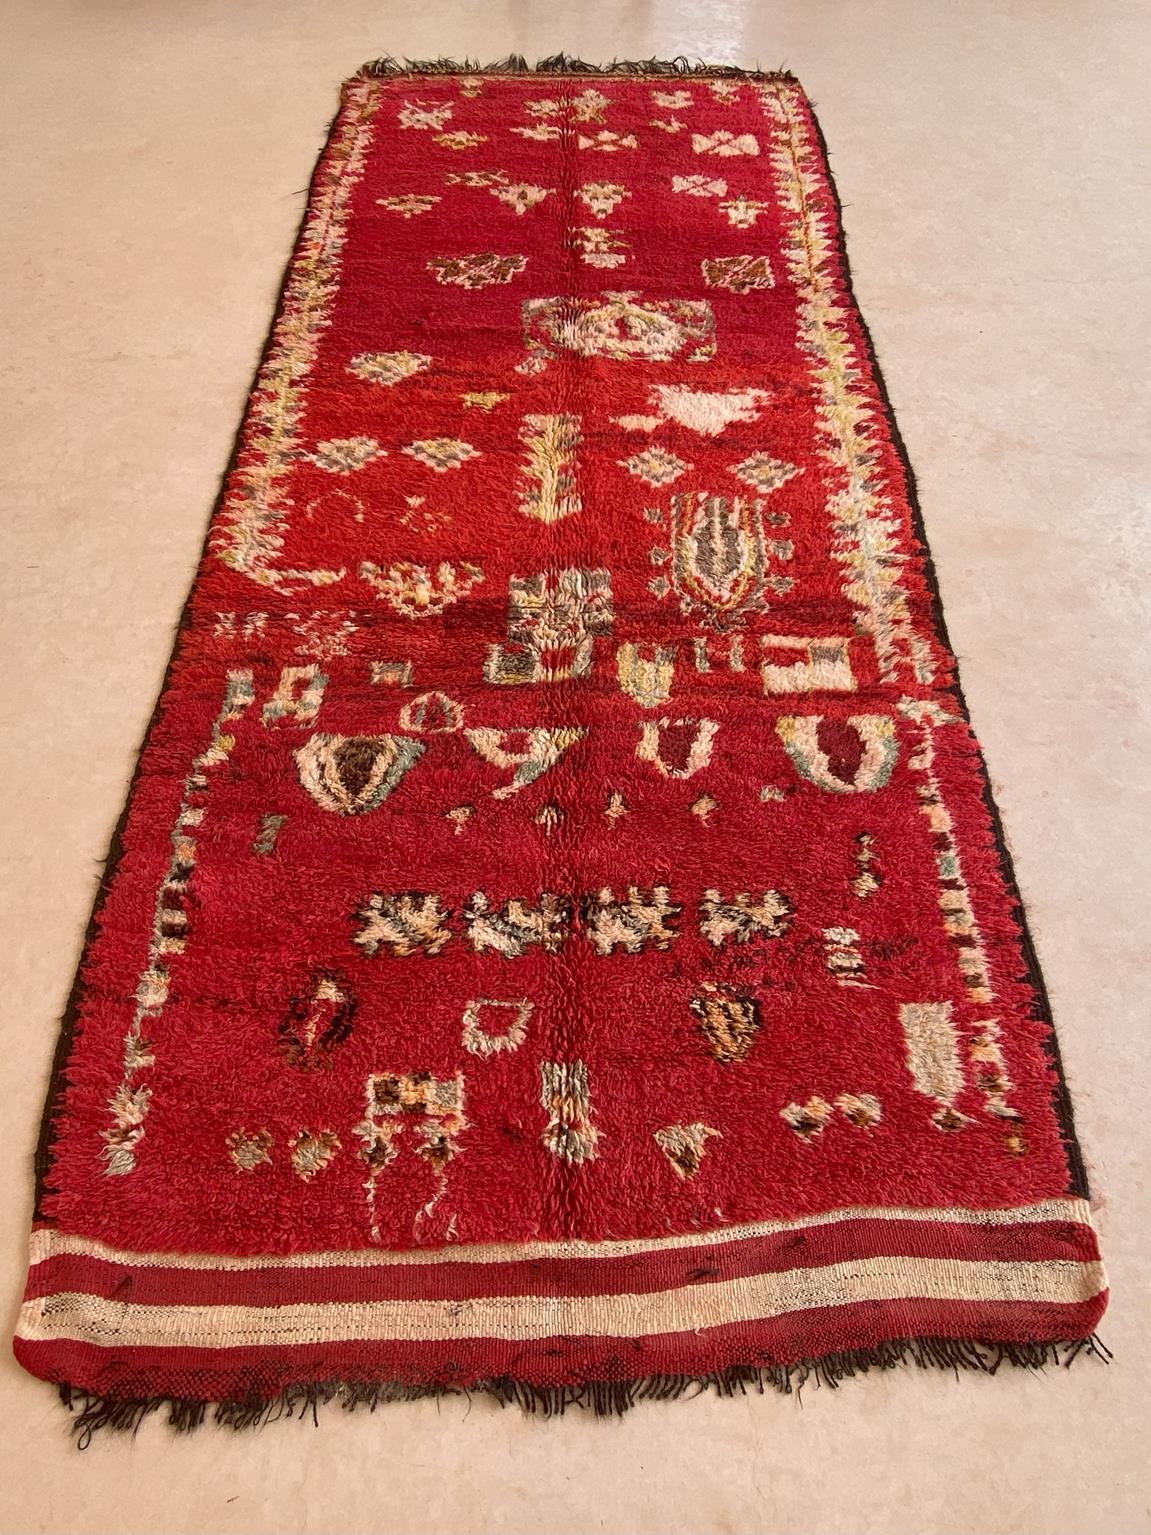 Wool Vintage Moroccan Rehamna rug - Red - 5.1x12.5feet / 156x382cm For Sale